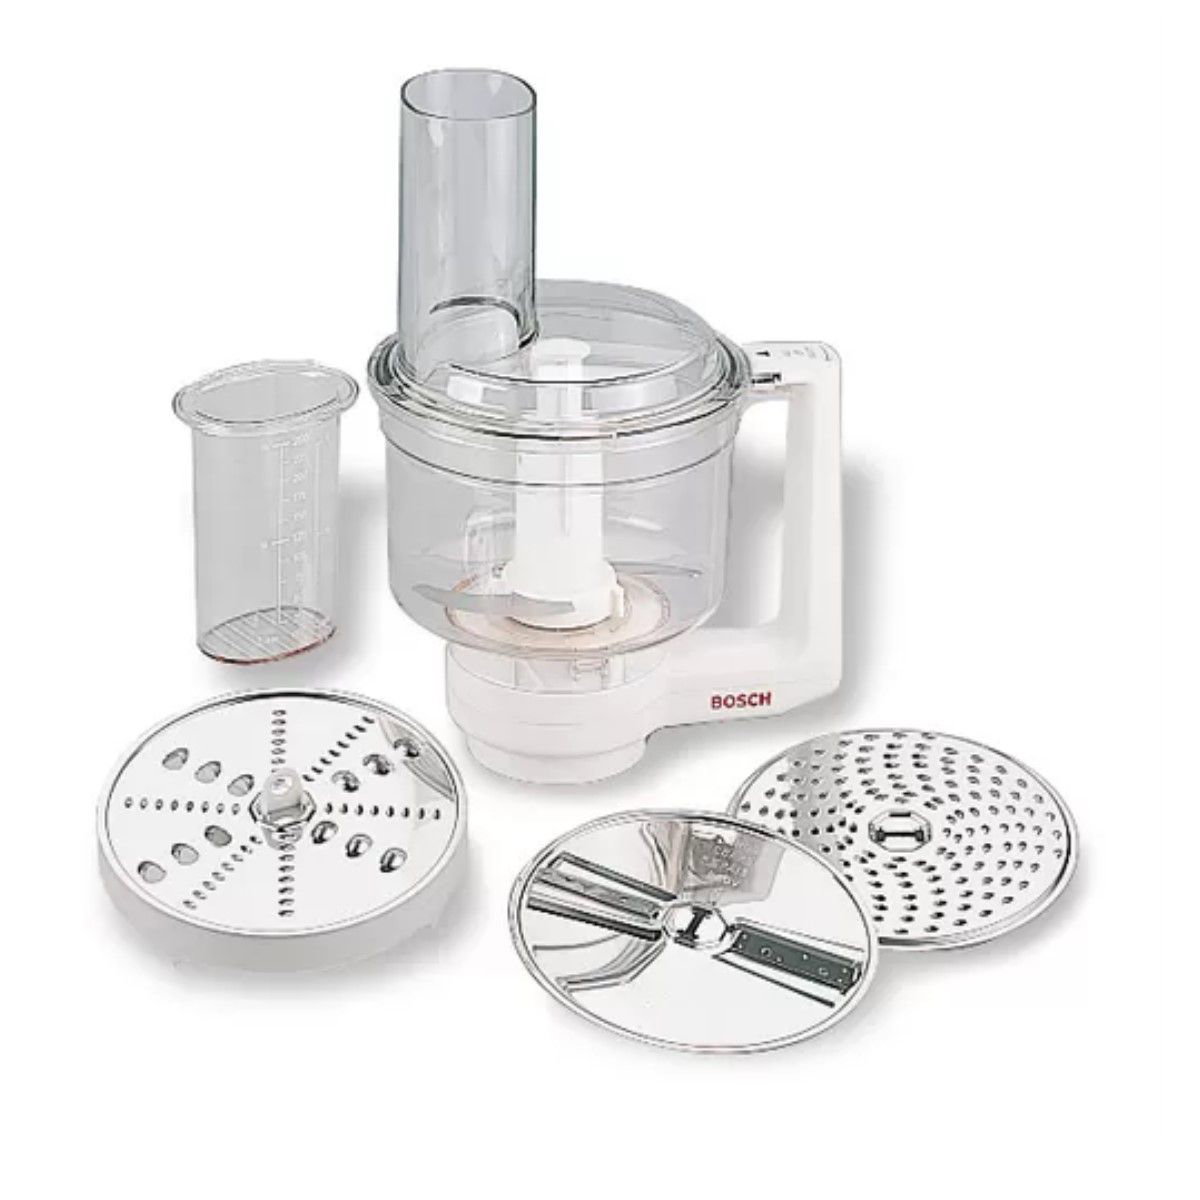 Bosch Food Processor for the Universal | Everything